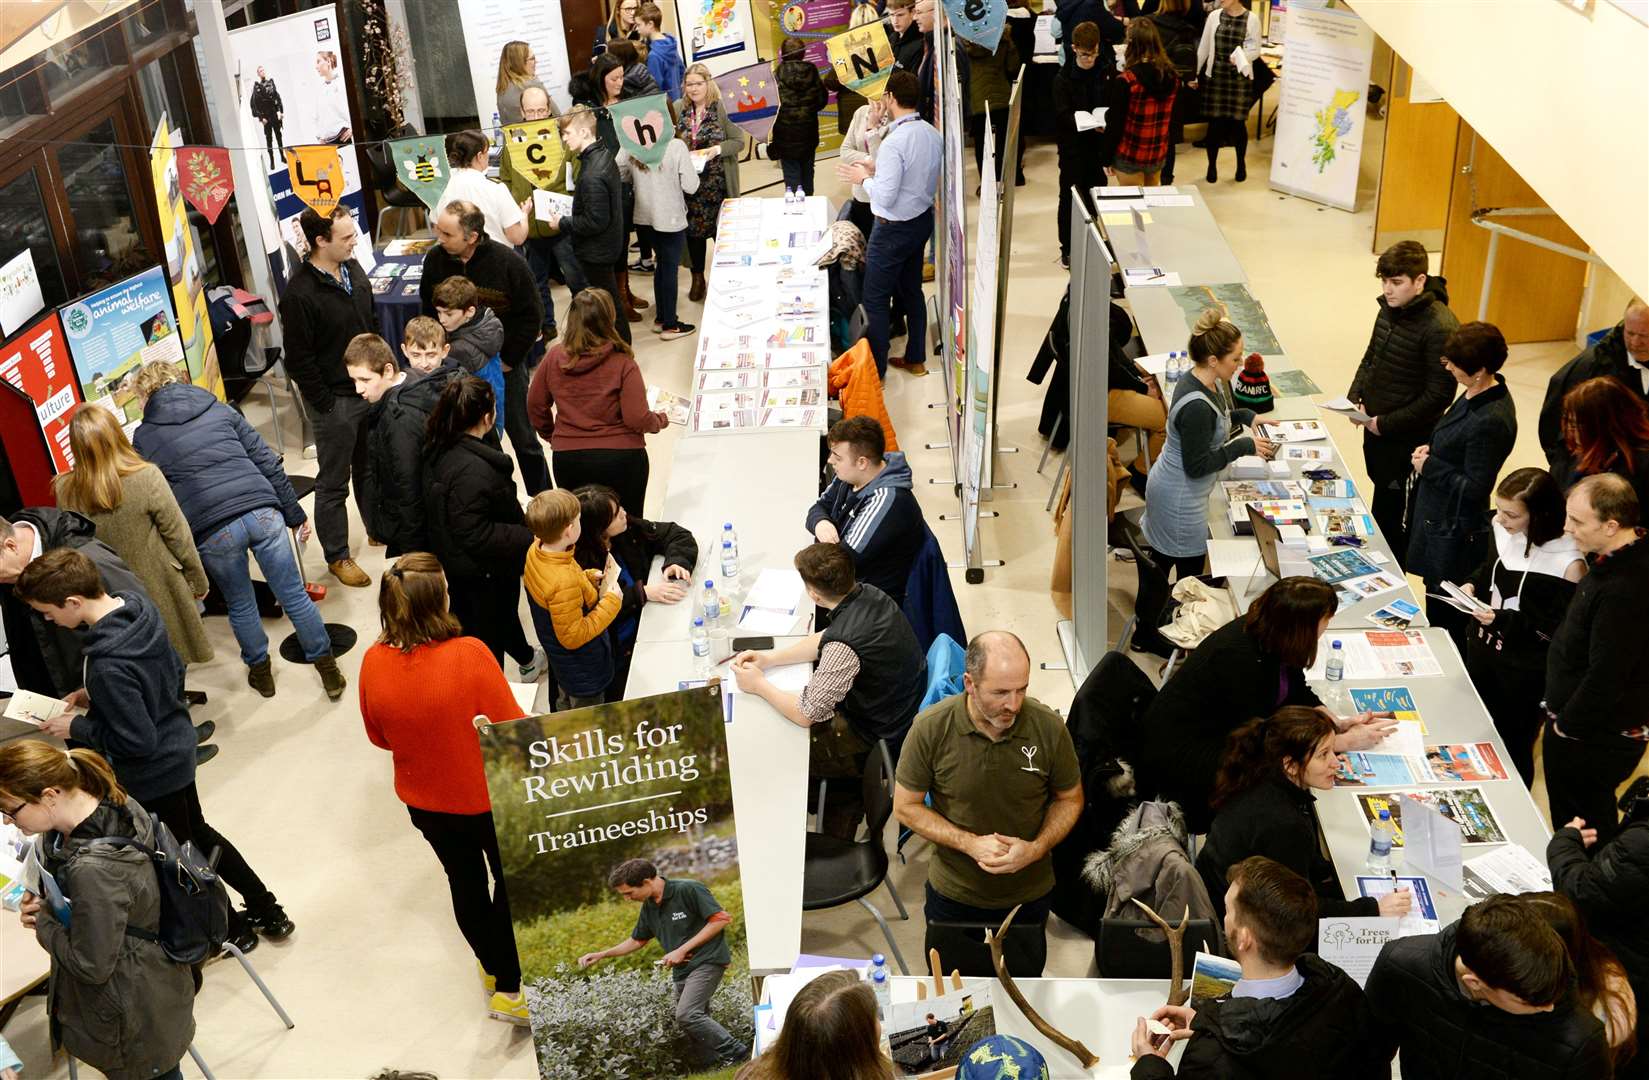 The careers fair was busy throughout the day.